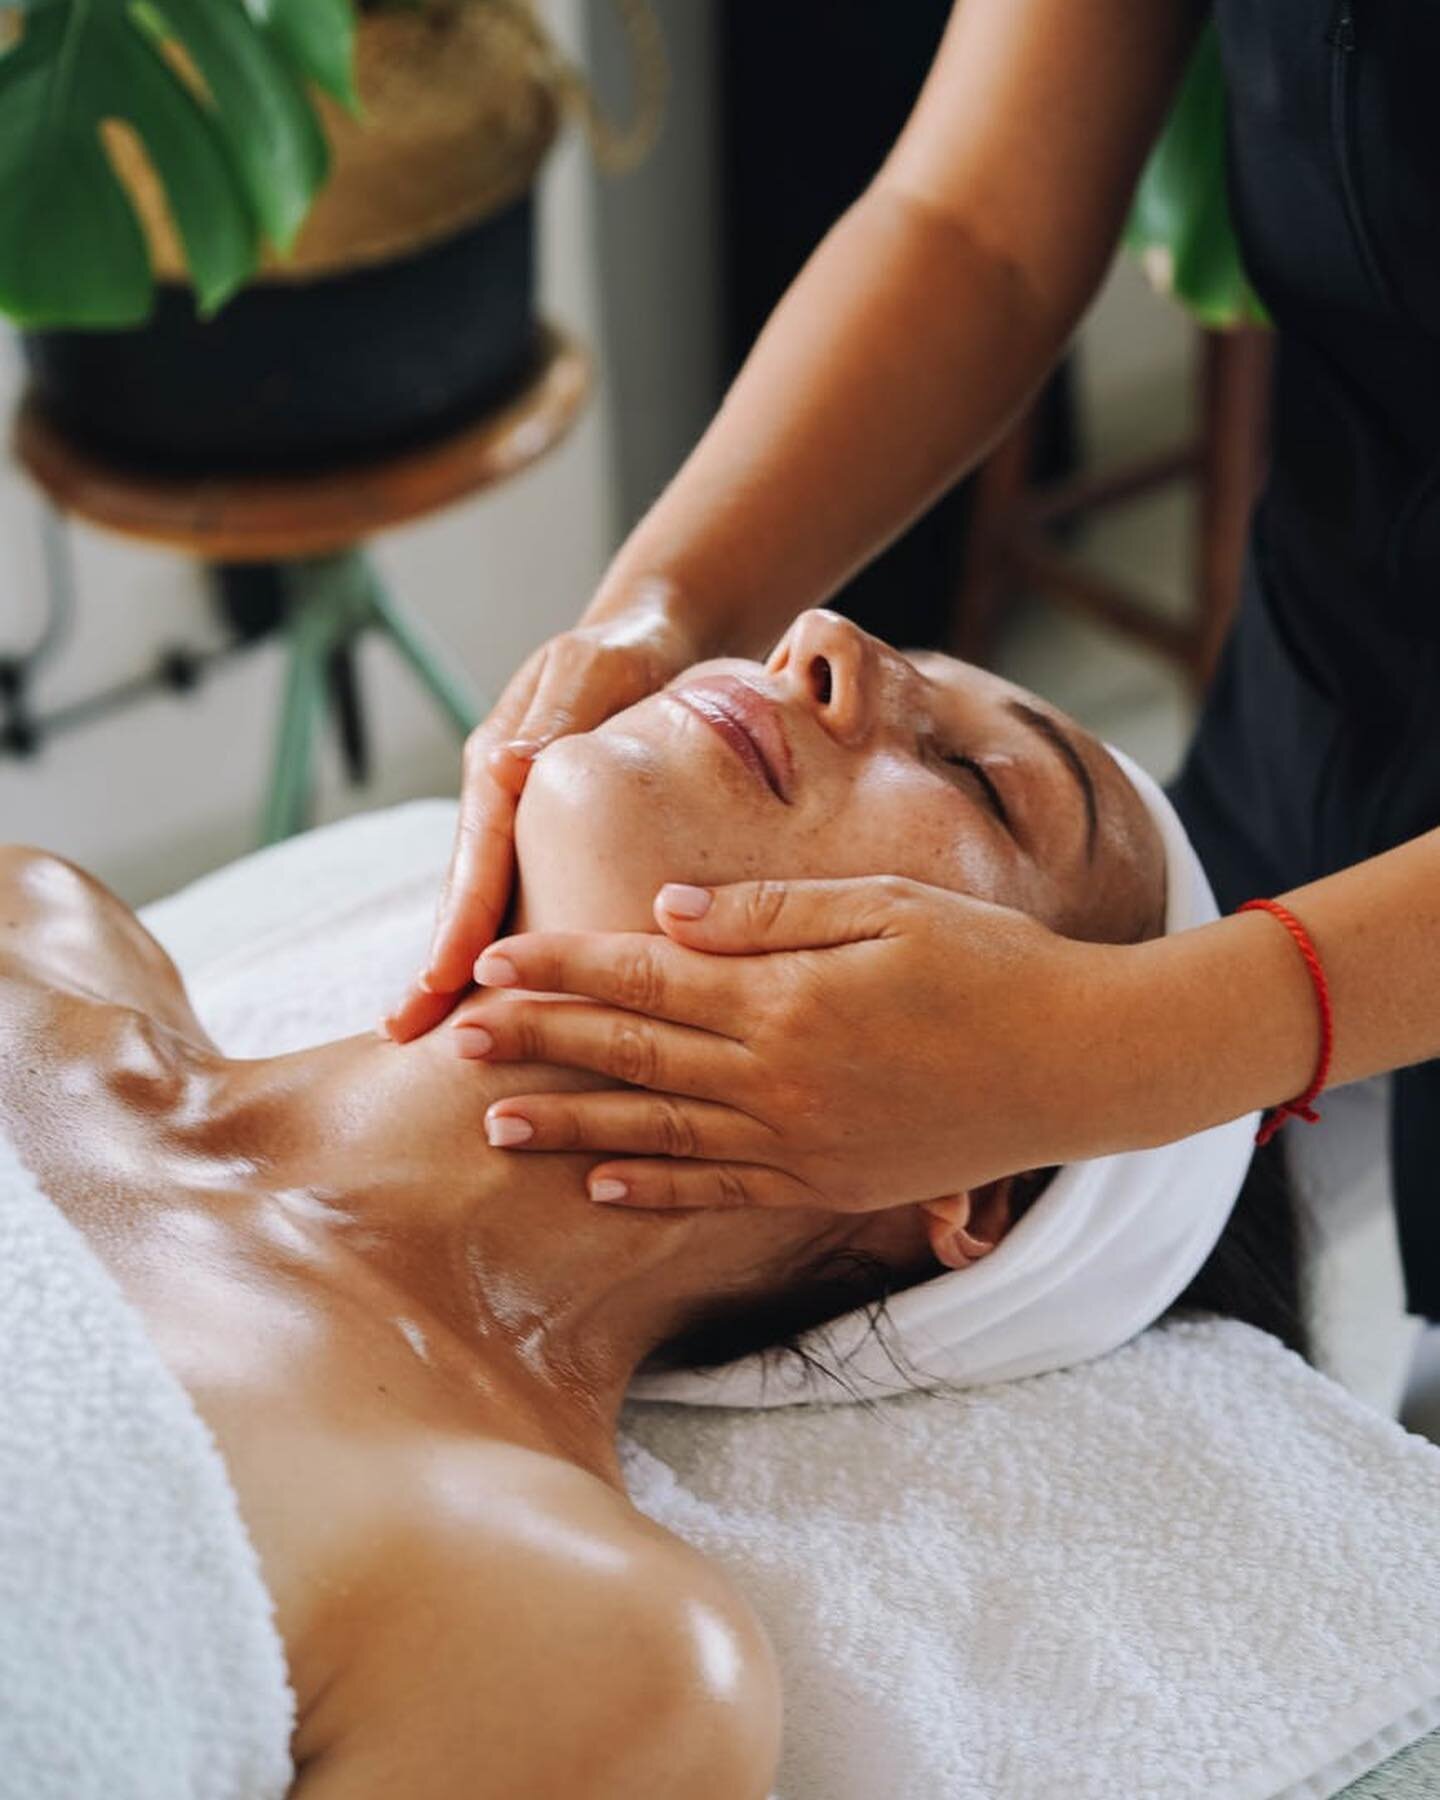 Time to immerse yourself in a massage for a natural facelift? Book online, select Facial Rejuvenation. Reduce wrinkles and expression lines, improve skin suppleness and go into a dreamy, relaxed state with Mary-Anne.

#facialmassage #facialmassagesub